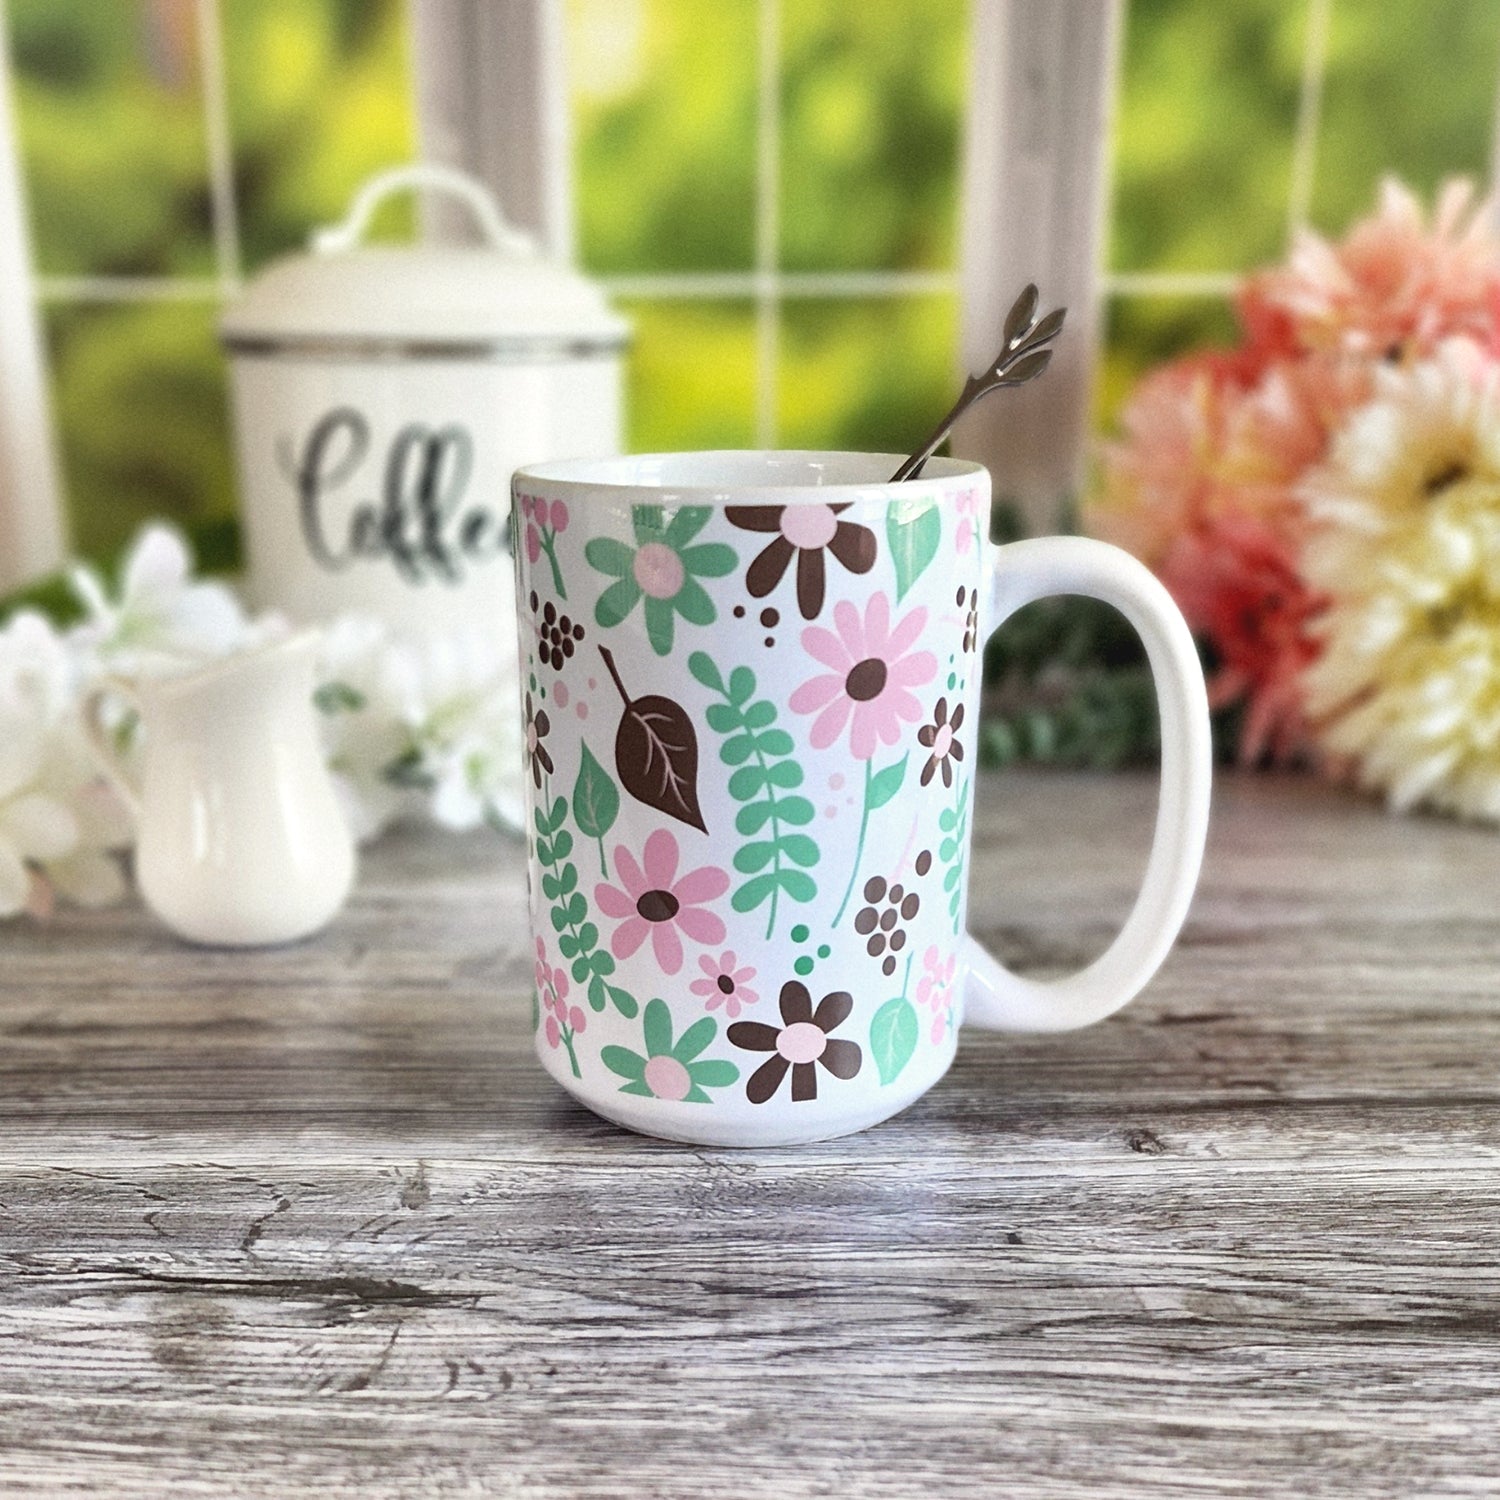 Pink Green Brown Floral Pattern Mug (15oz, in rustic kitchen scene) at Amy's Coffee Mugs